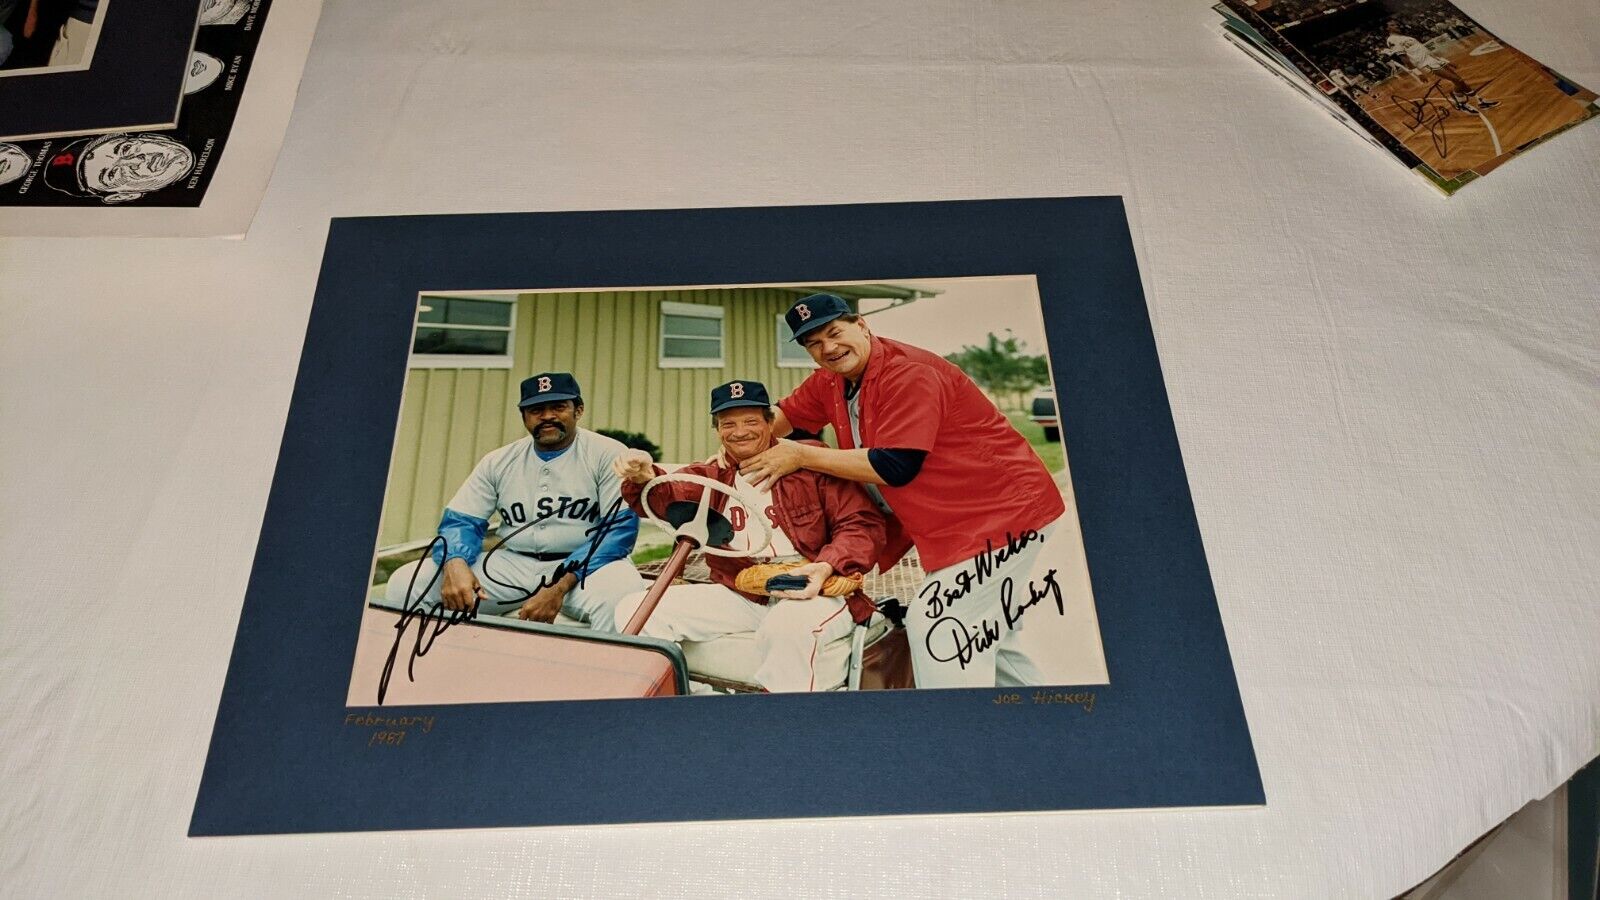 Luis Tiant Dick Radatz Boston Red Sox Signed 8x10 Matted Photo Poster painting W/Our COA READ